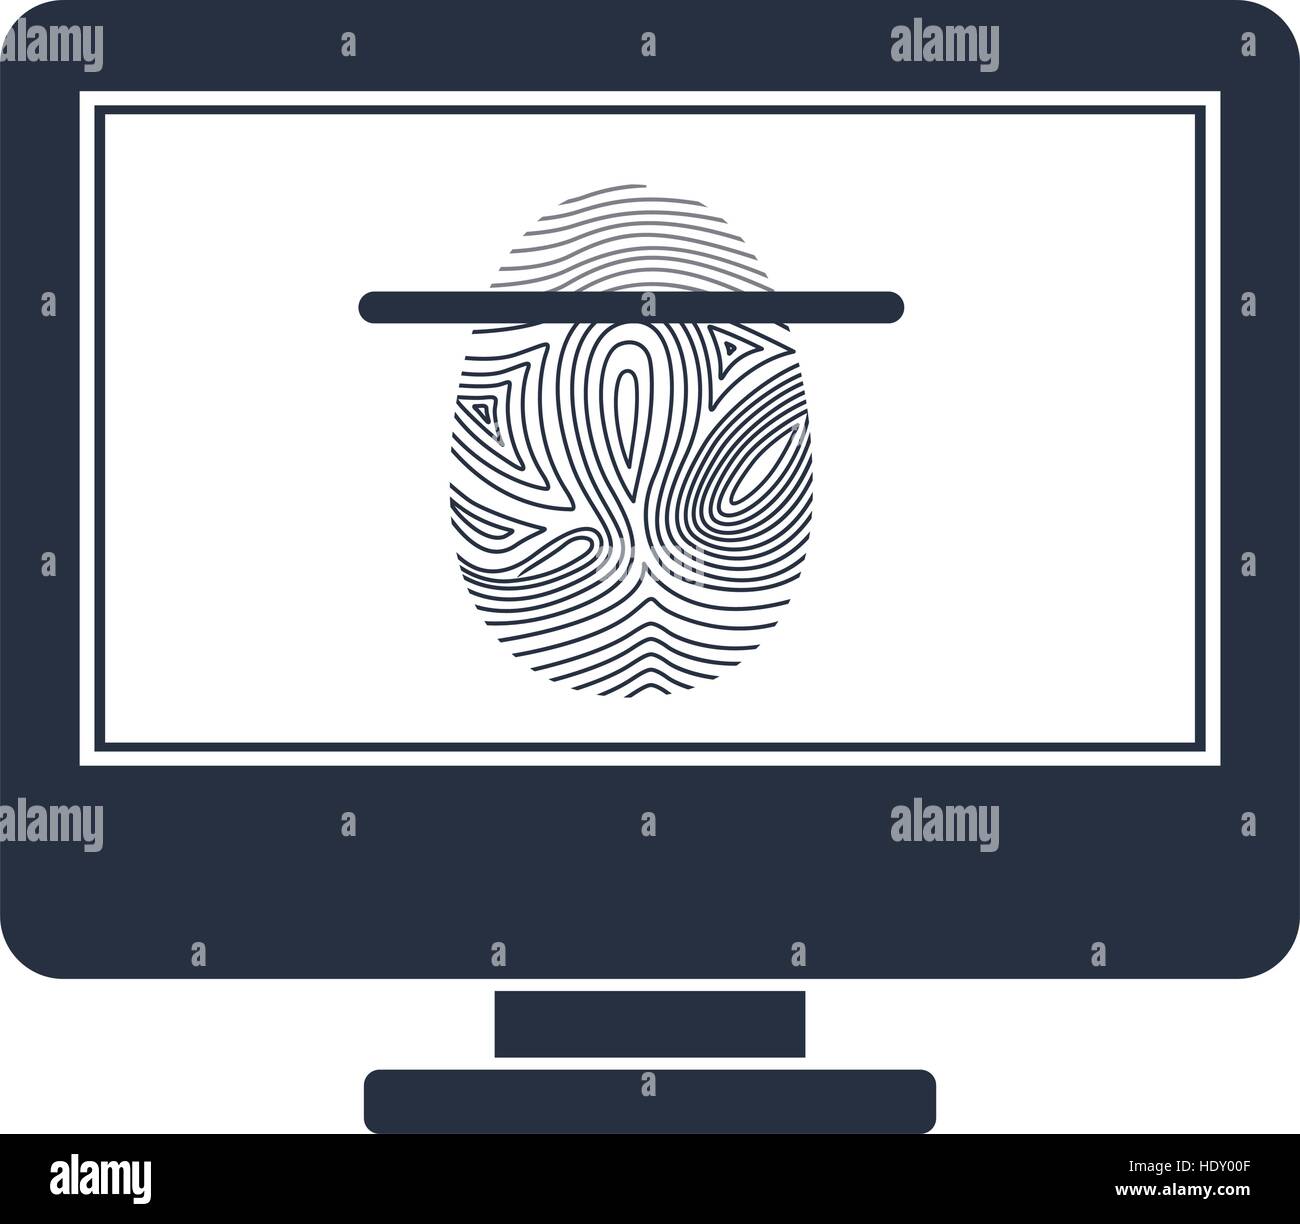 Fingerprint and computer icon. Identity security print and privacy theme. Isolated design. Vector illustration Stock Vector